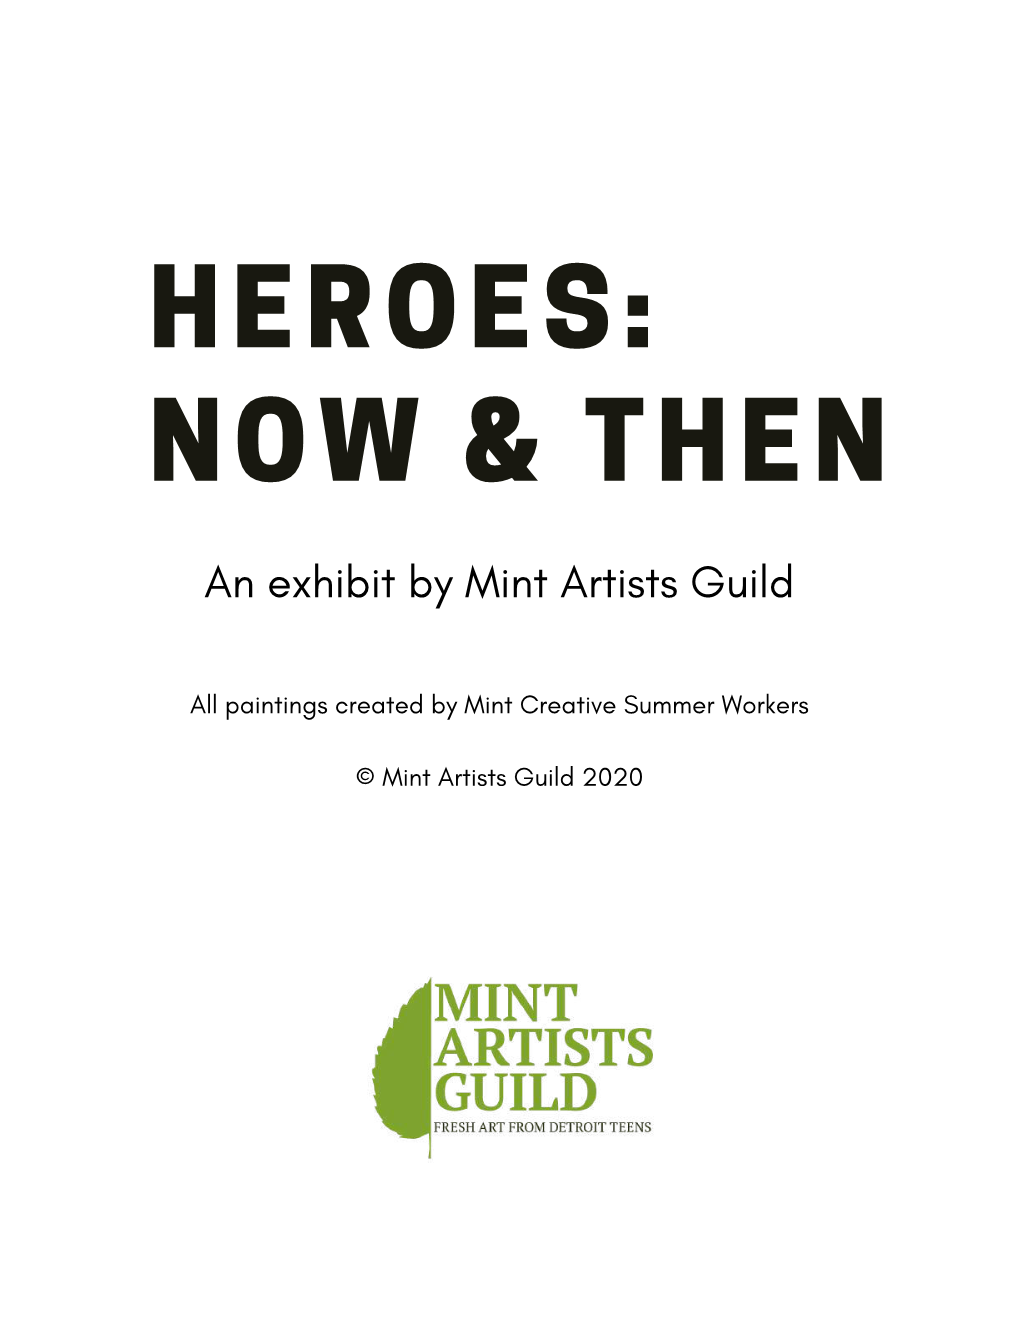 15 Portraits in Mint's Heroes: Now & Then